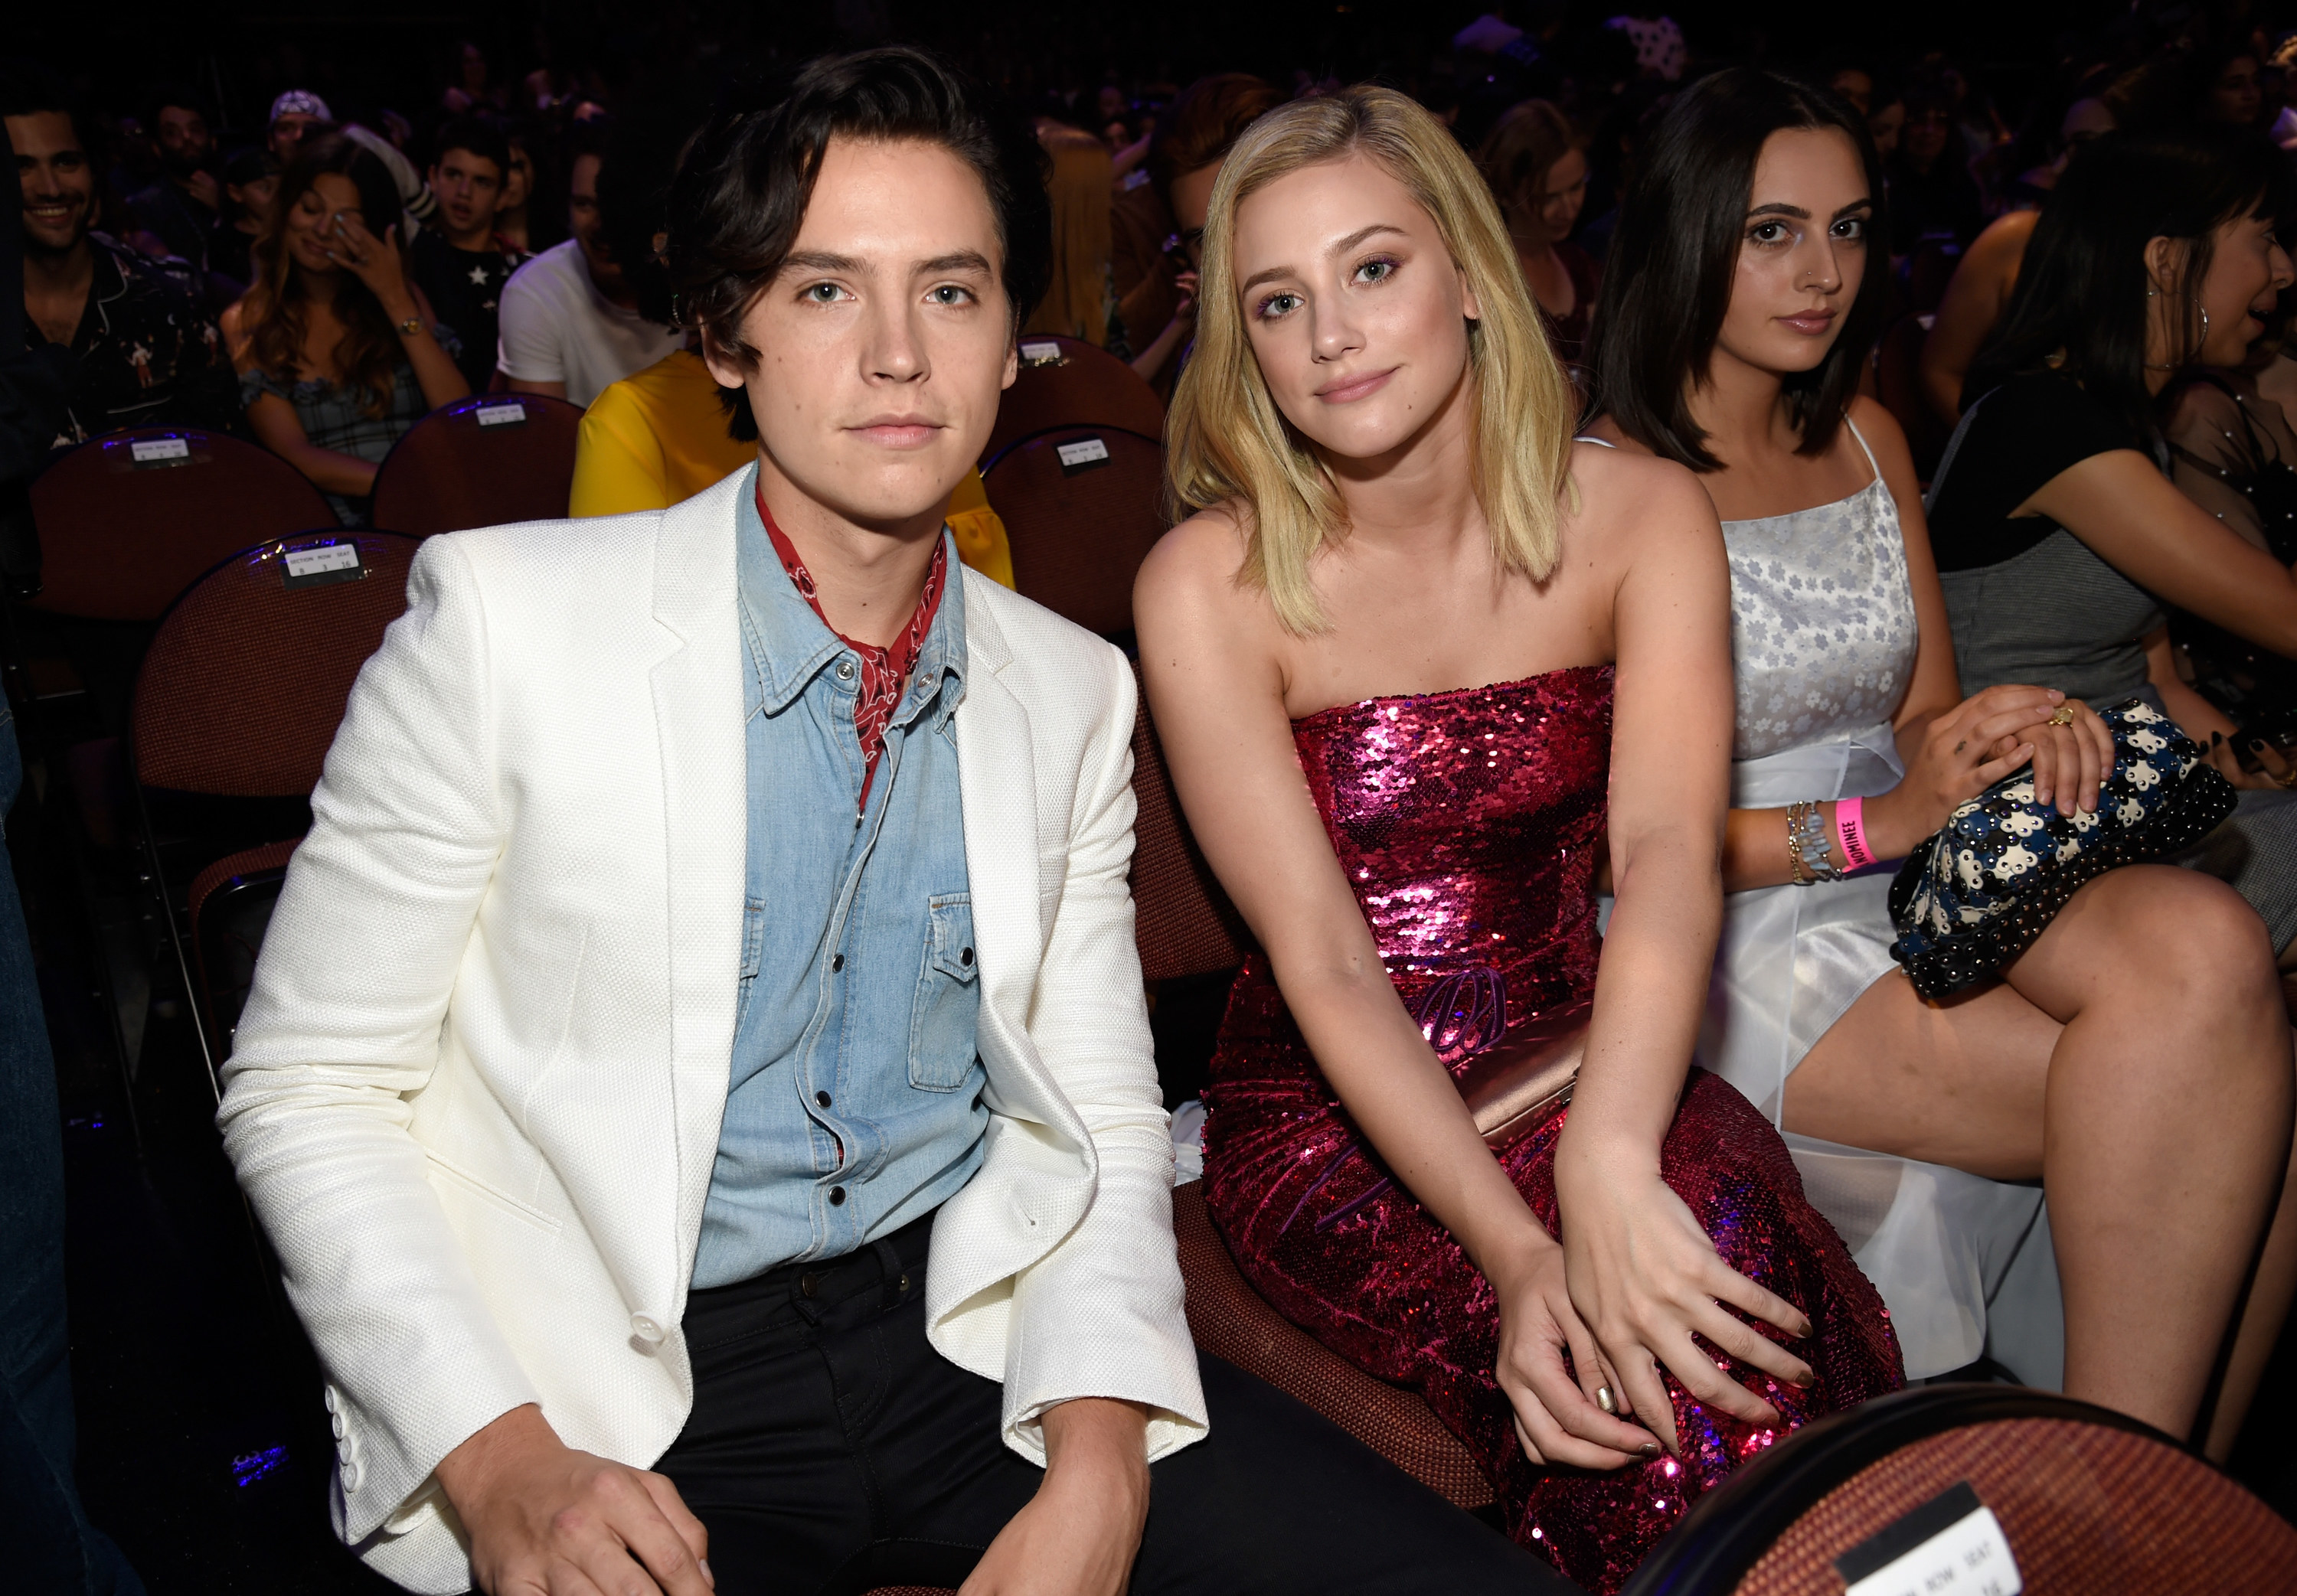 cole and lili sitting together at an event